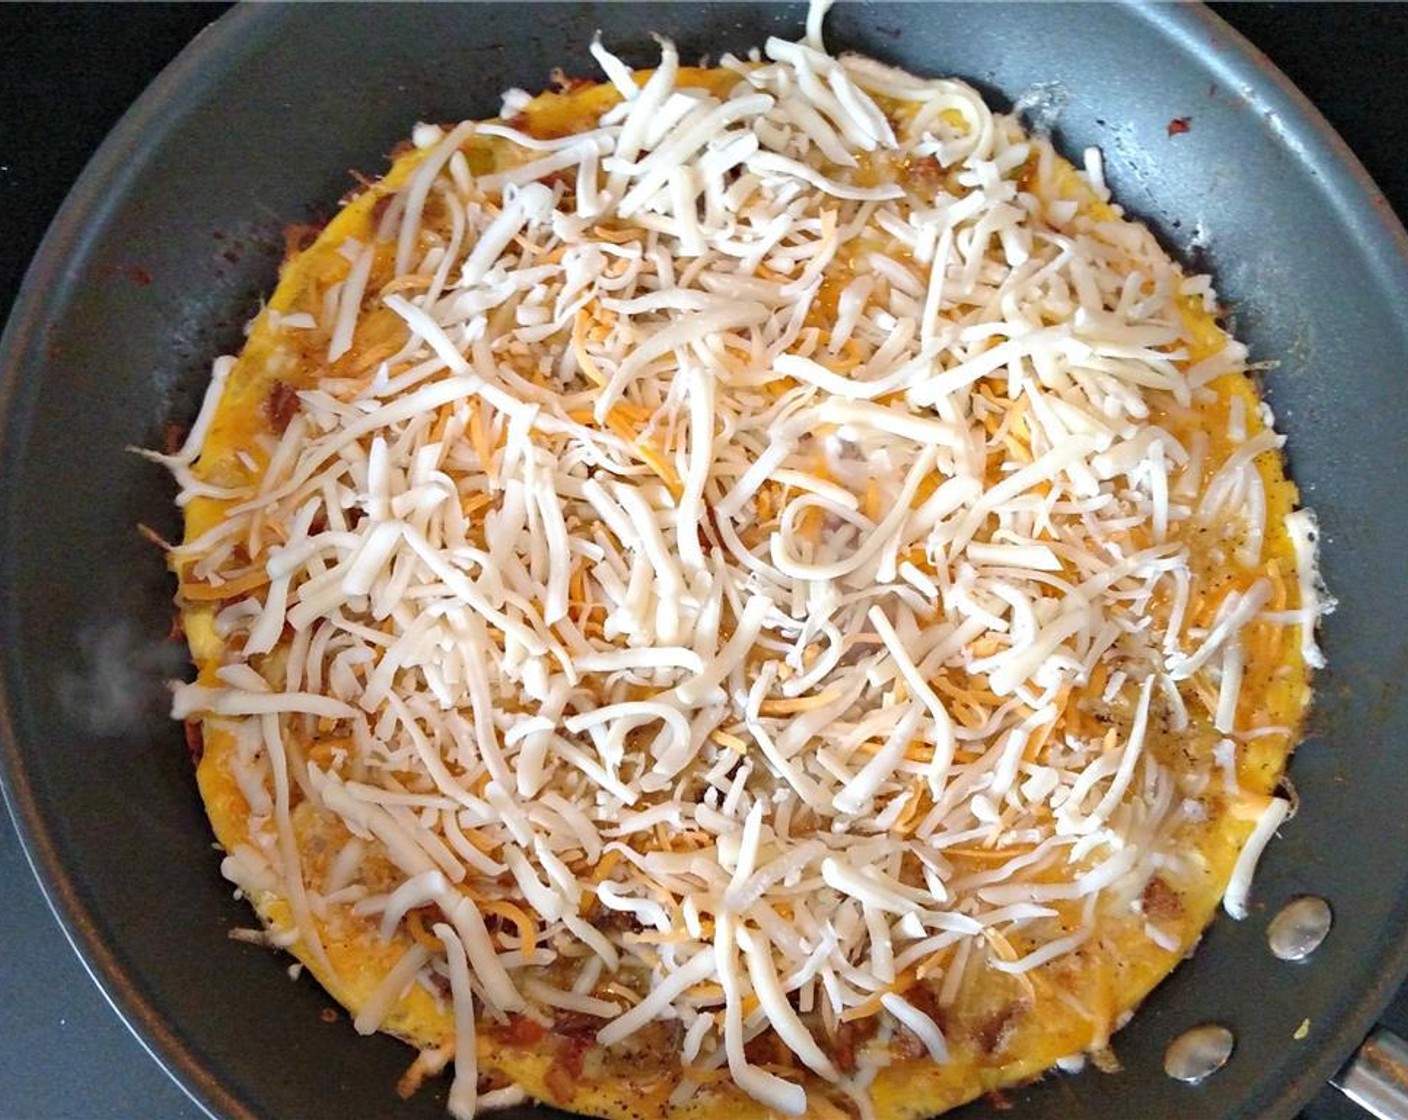 step 8 Once you've reached jiggly perfection, sprinkle Shredded Cheese (1/2 cup)  over the top of the frittata and place frittata with uncooked cheese into your preheated oven set to broil.